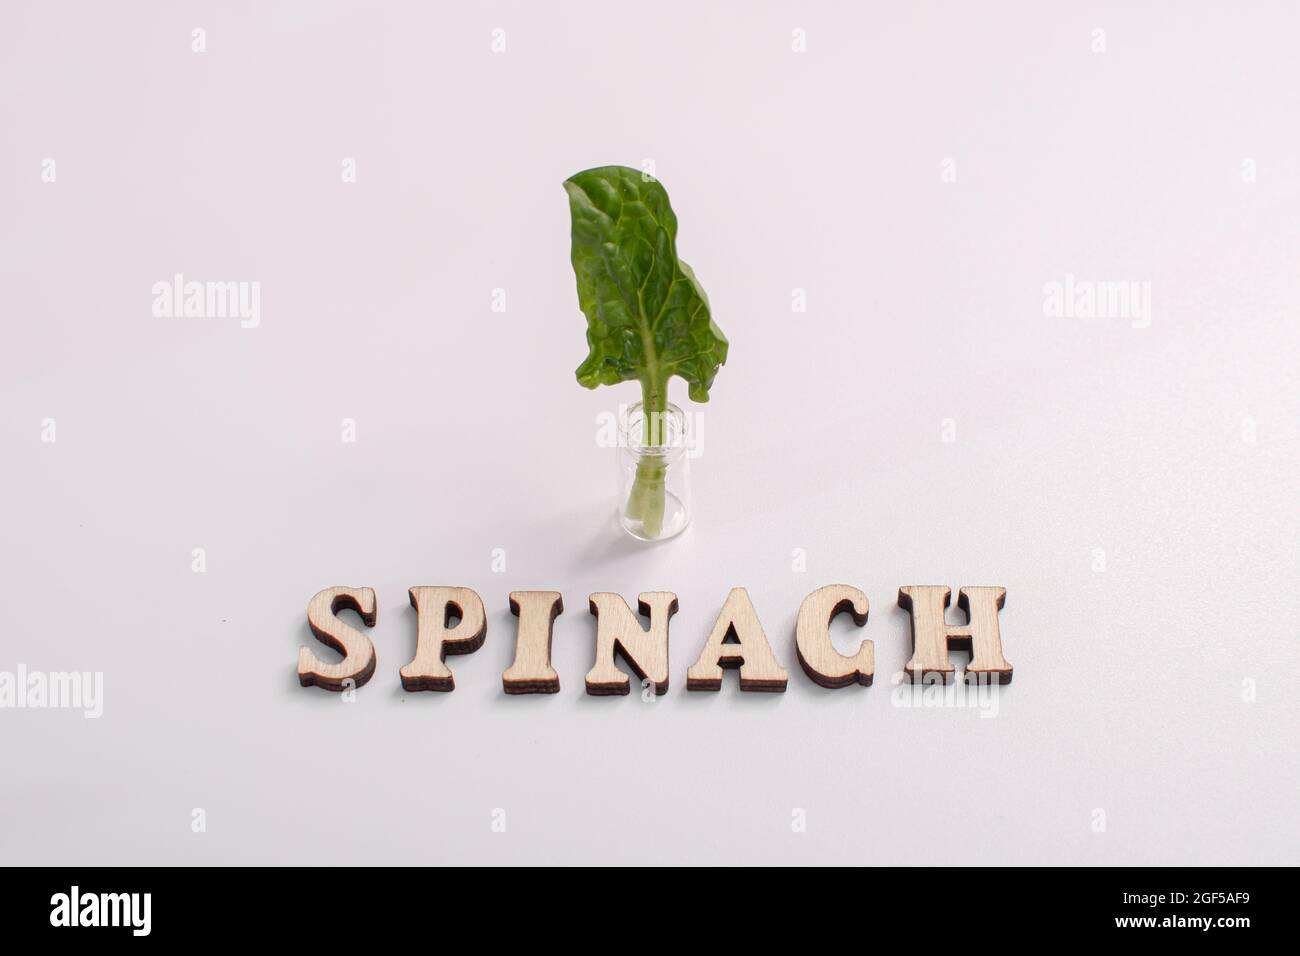 the word spinach is written in wooden letters. Stock Photo